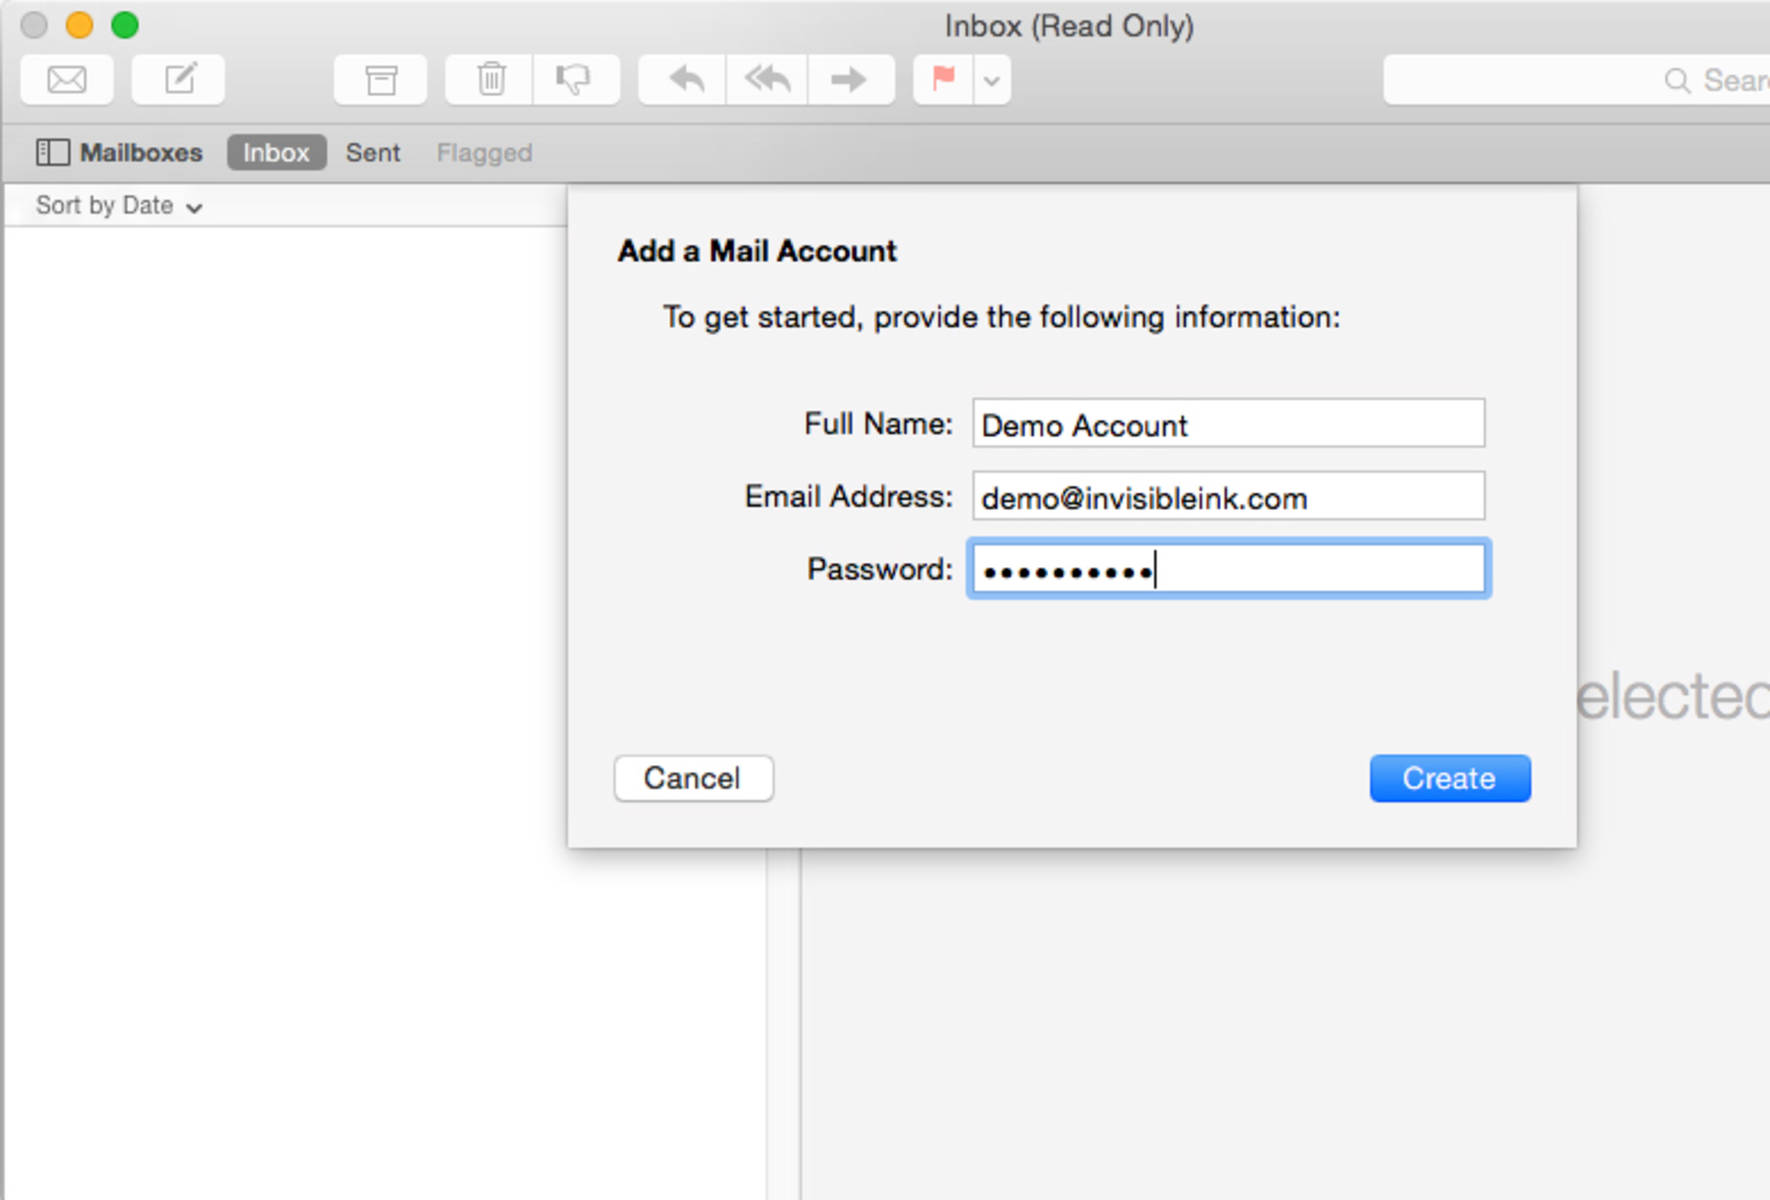 Step 2 » Enter your name, email address and password, then click "Create". 